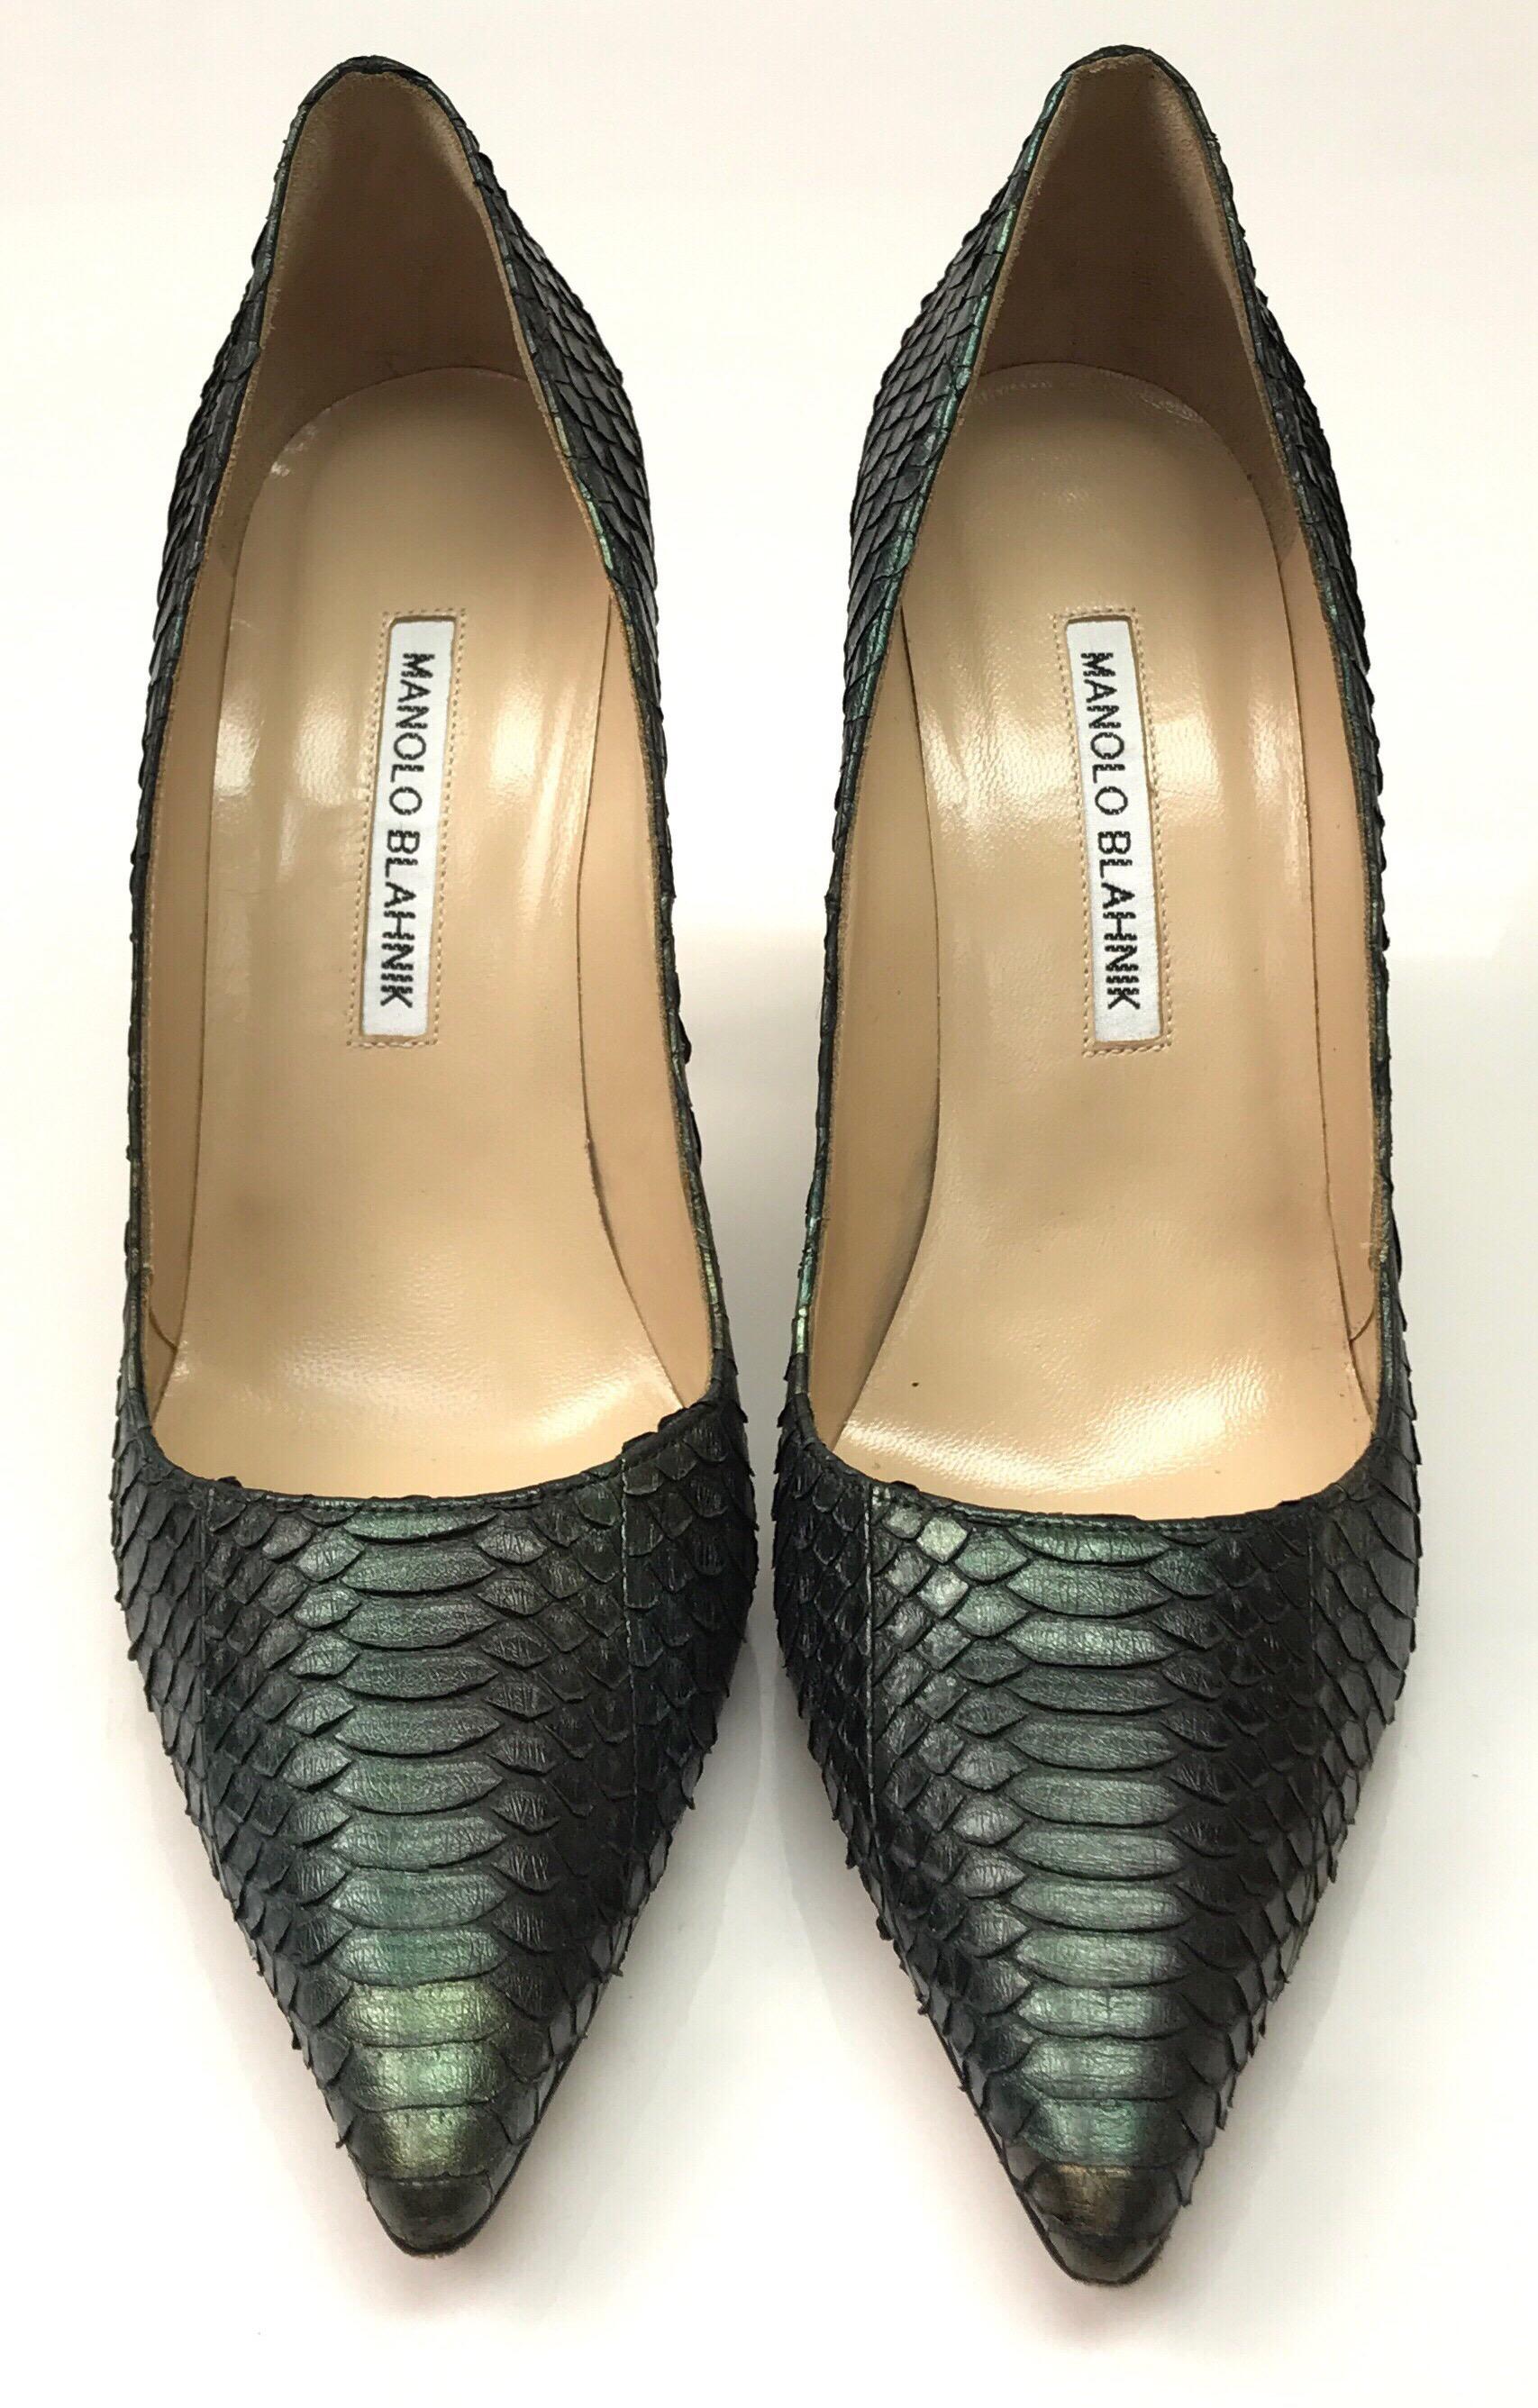 Manolo Blahnik Blue & Green Python Pumps - 38.5. These amazing Manolo Blahnik pumps are in excellent condition. They show barely any sign of use, with exception to the bottom of the shoe, as shown in picture. They are a blue and green python print